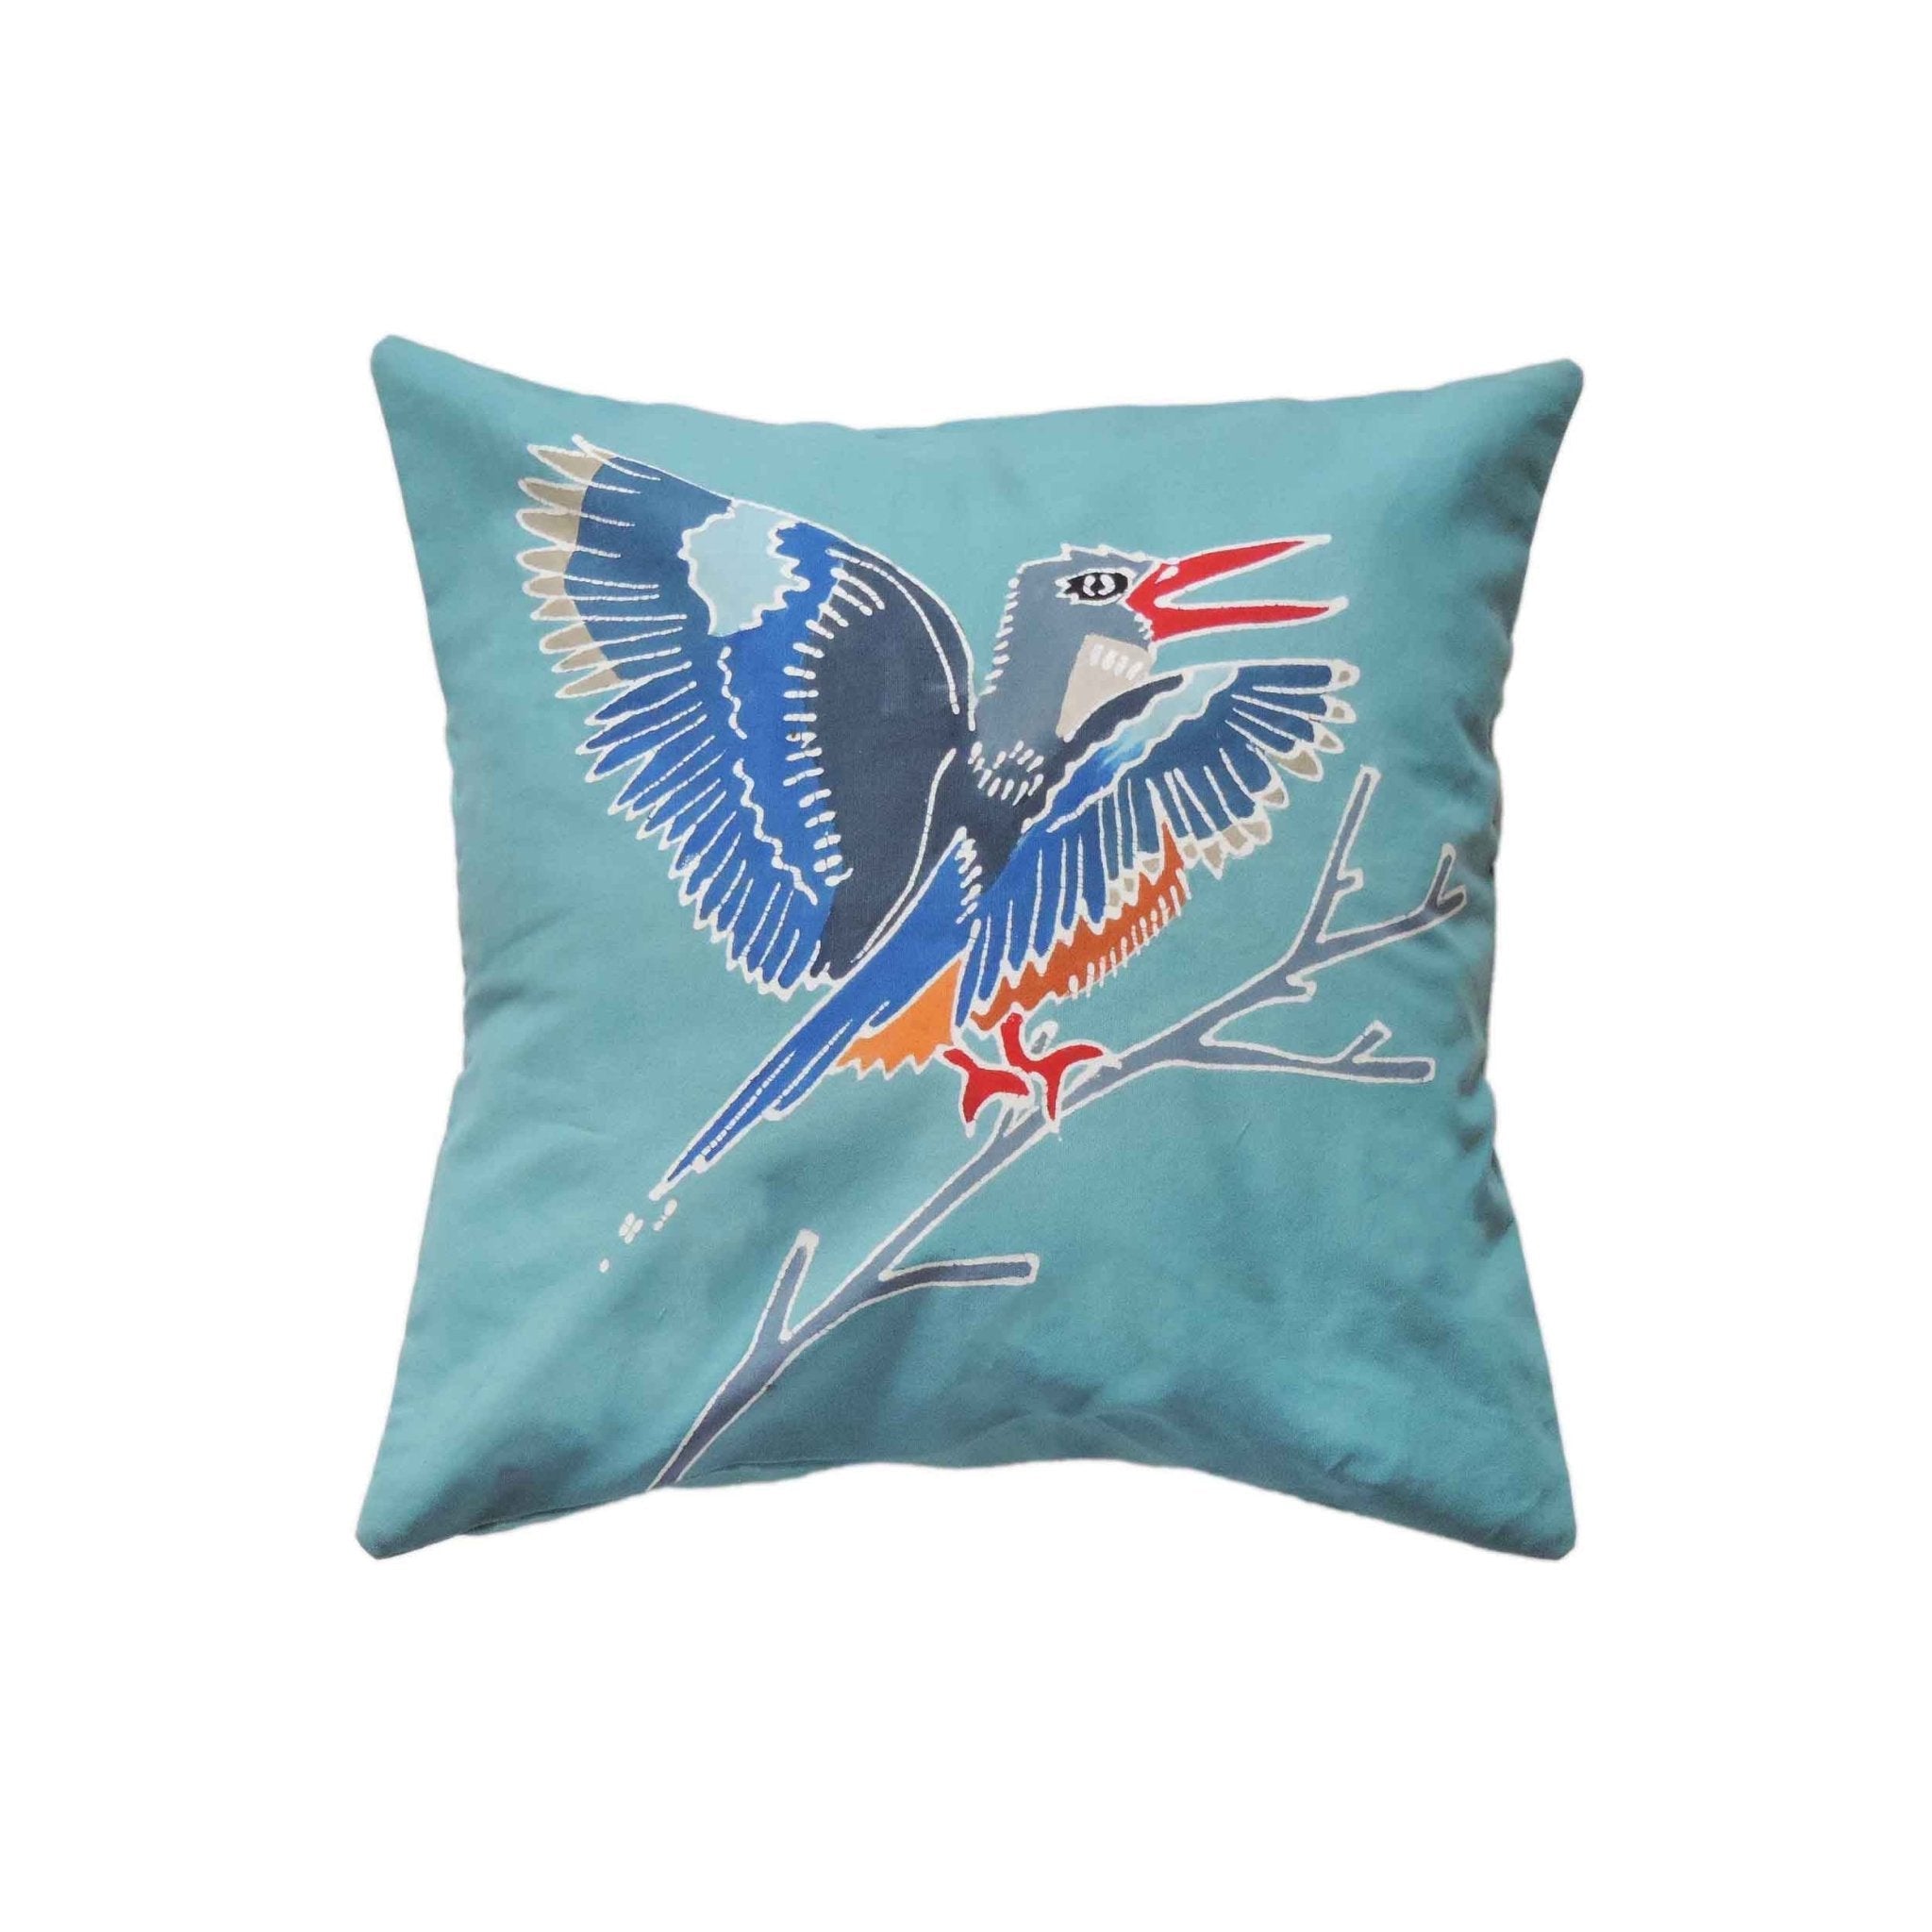 Beautiful African Kingfisher cushion cover with a stunning light blue background.